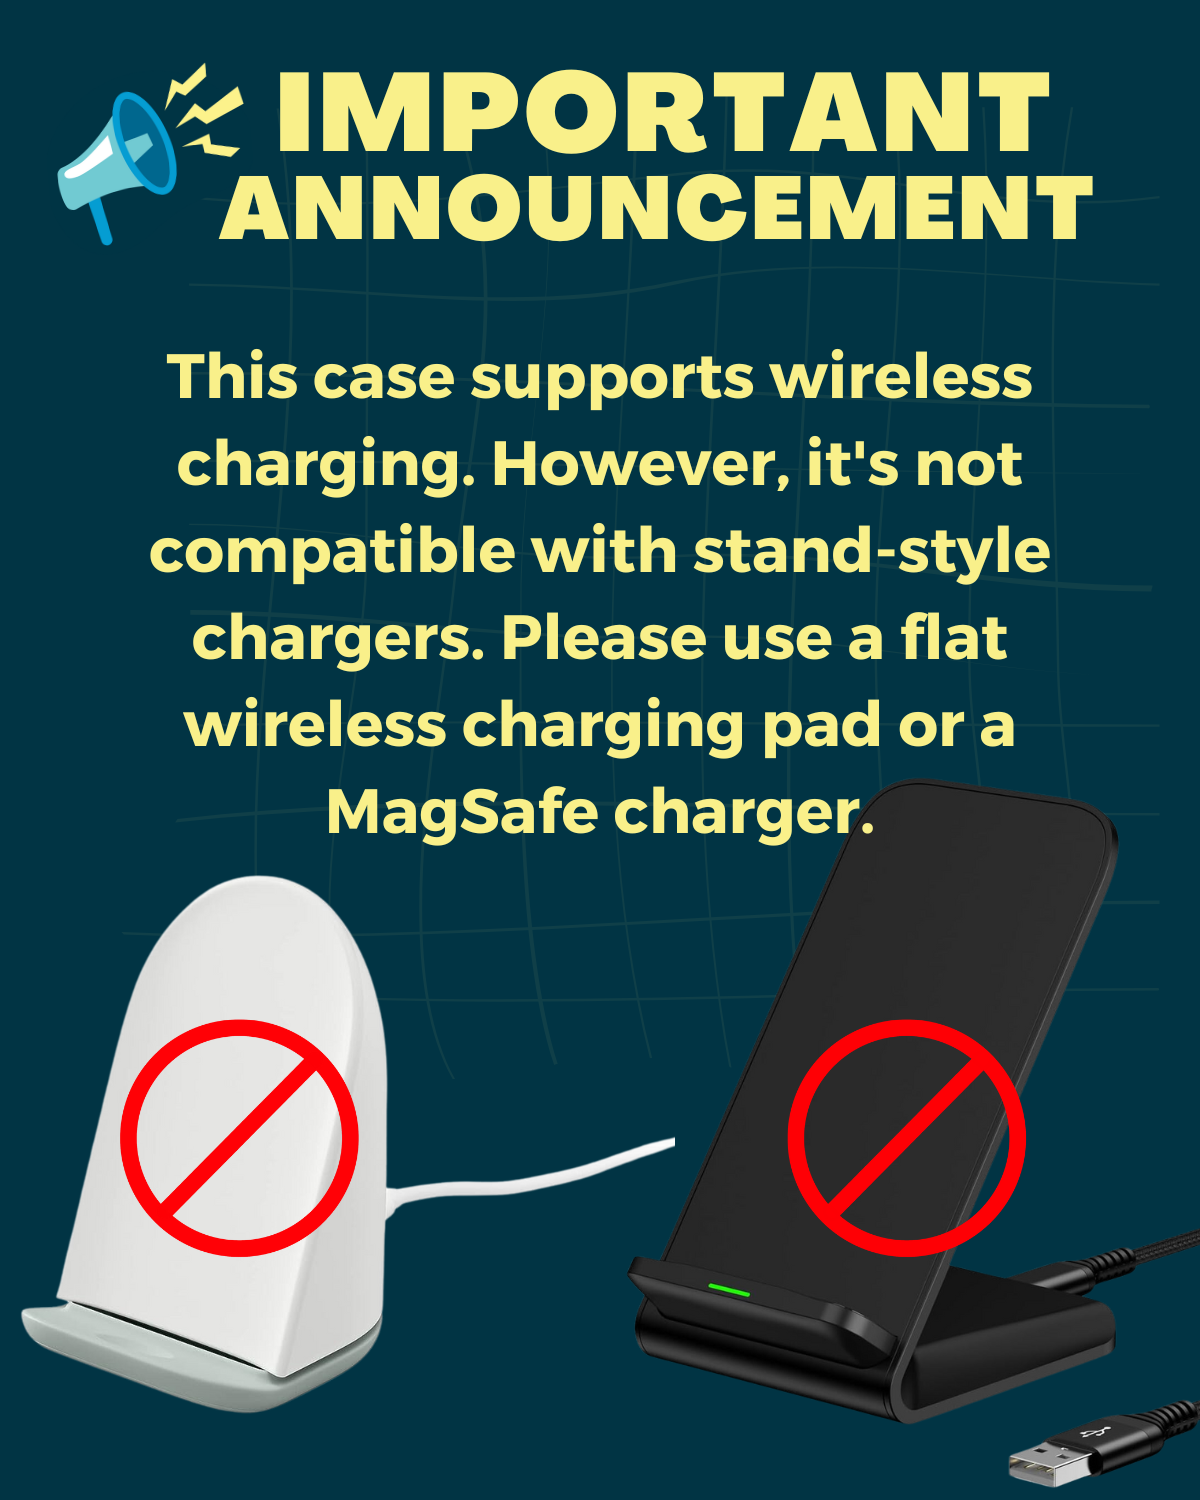 Super Thin Galaxy S24+ Case Charging Announcement